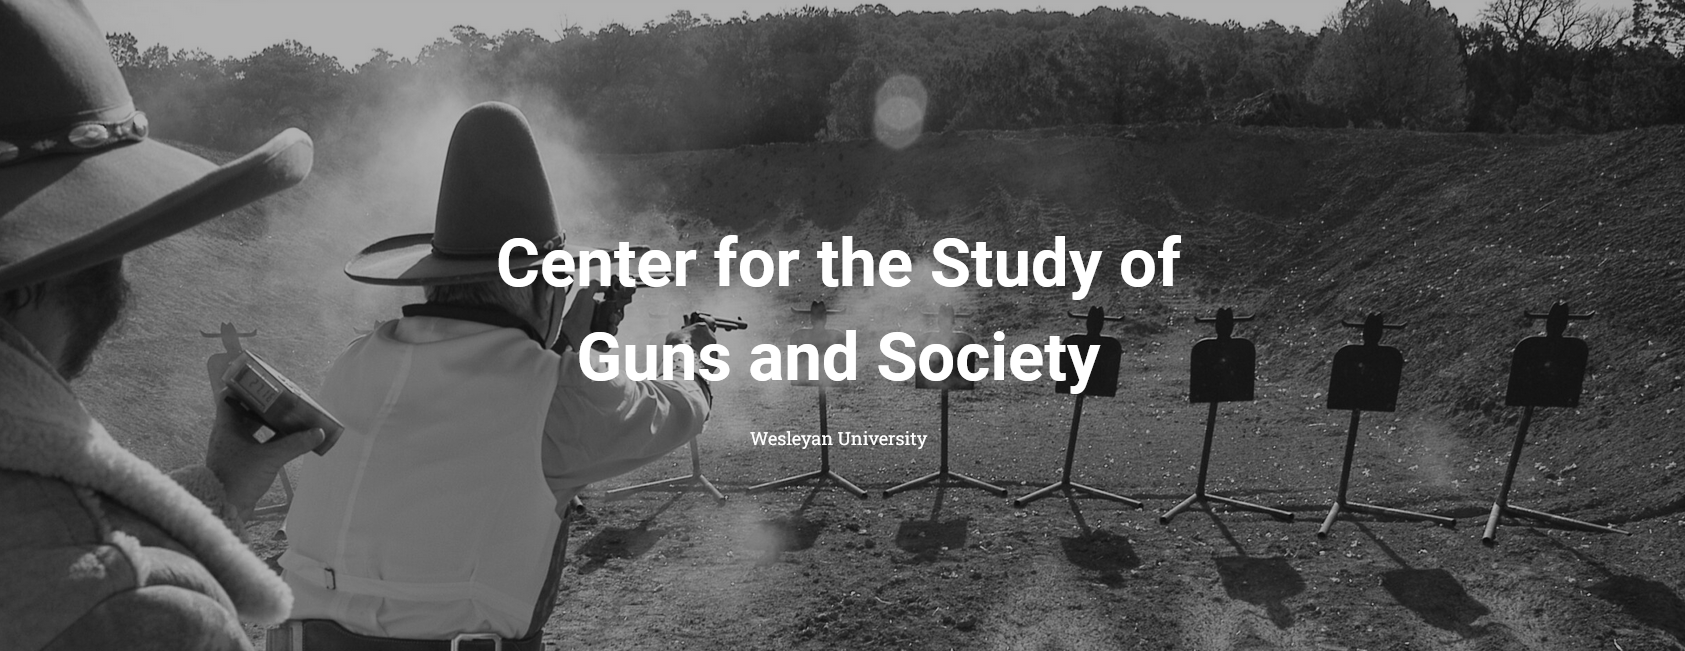 center for the study of guns and society logo